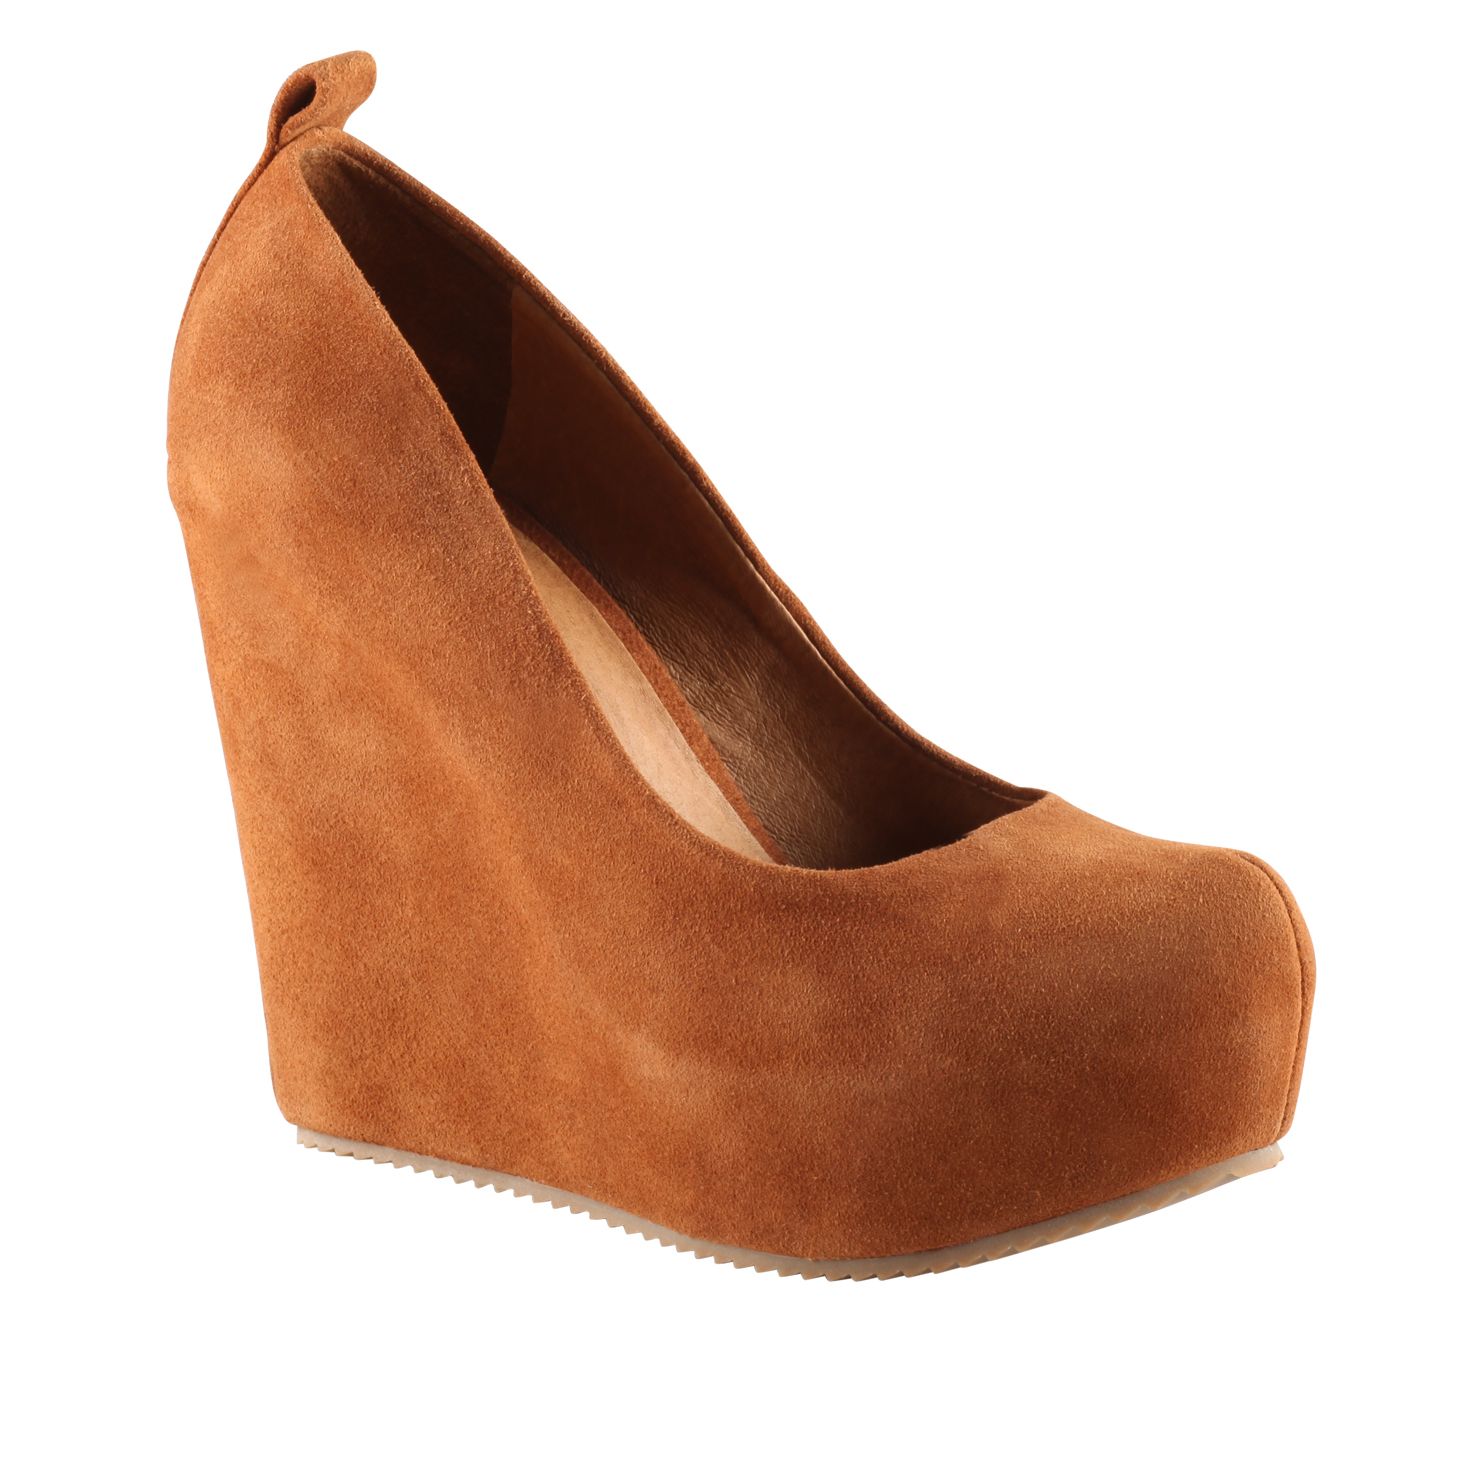 Aldo zingg wedge court shoes. This fabulous wedge will add some ...